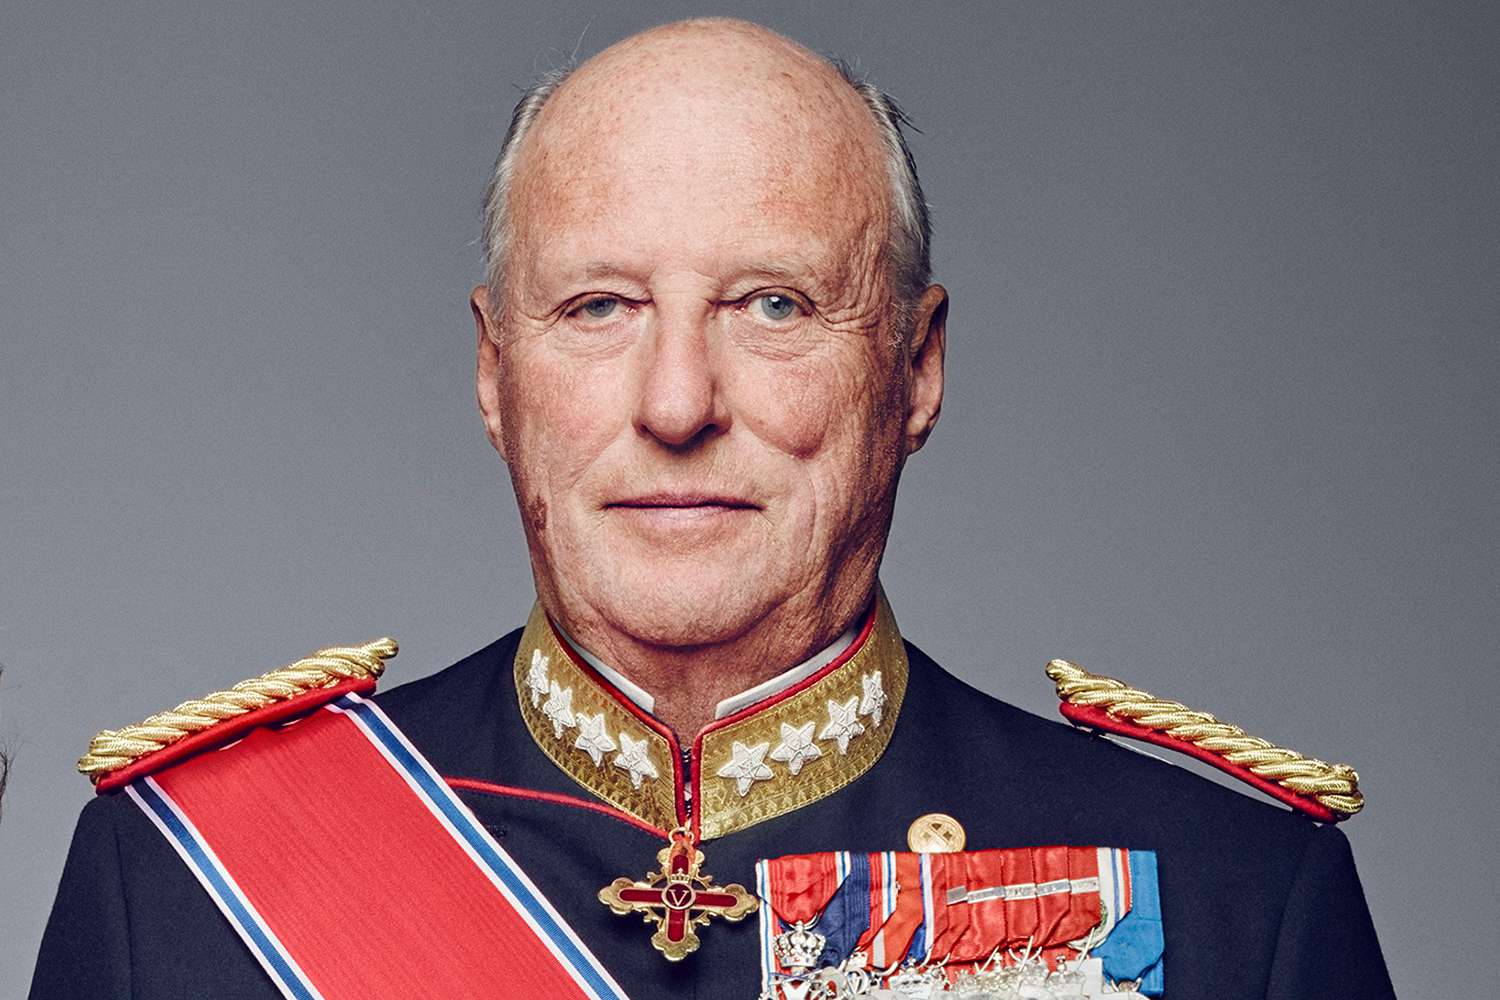 8 Surprising Facts About King Harald V Of Norway - Facts.net